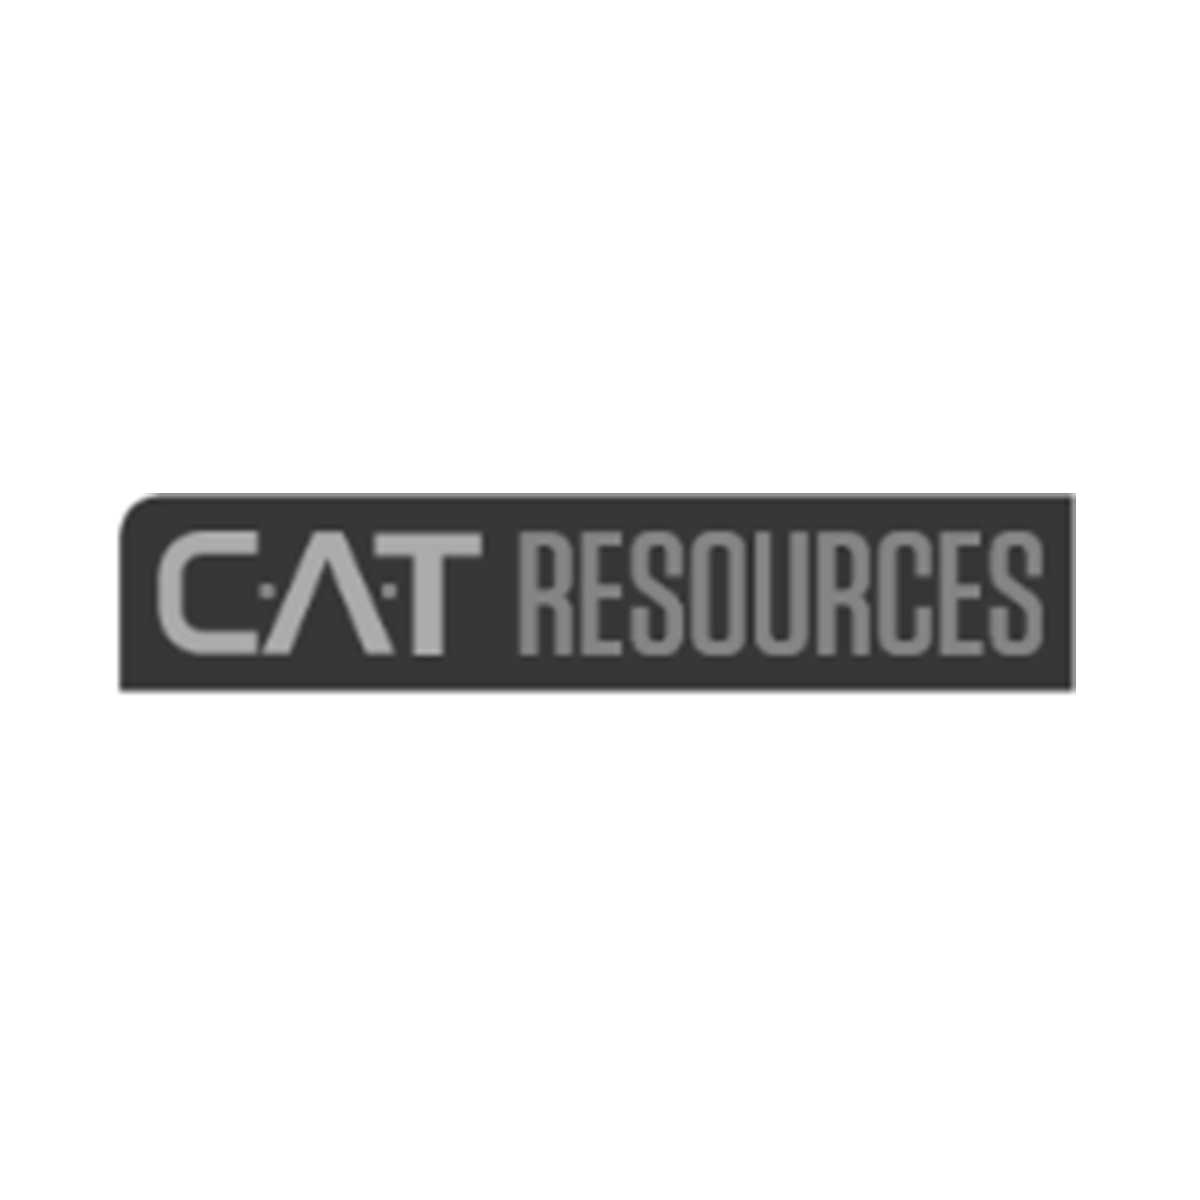 C.A.T. RESOURCES